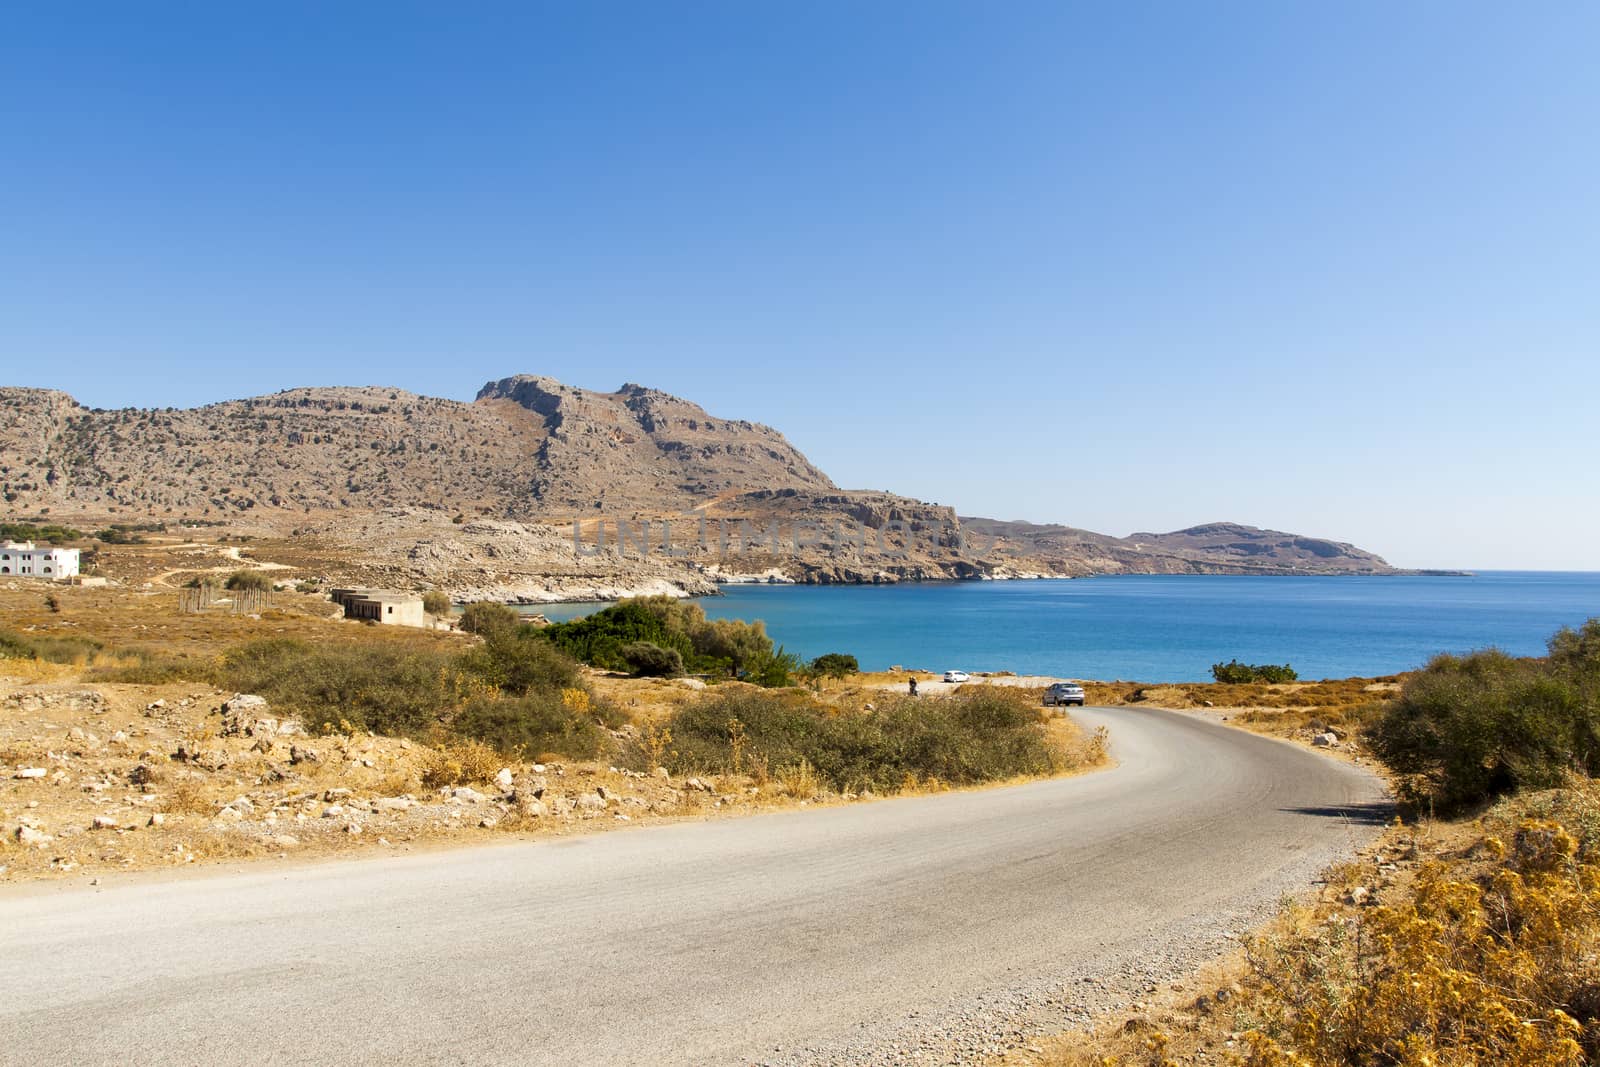 Panoramic view of the road leading to the Agathi beach